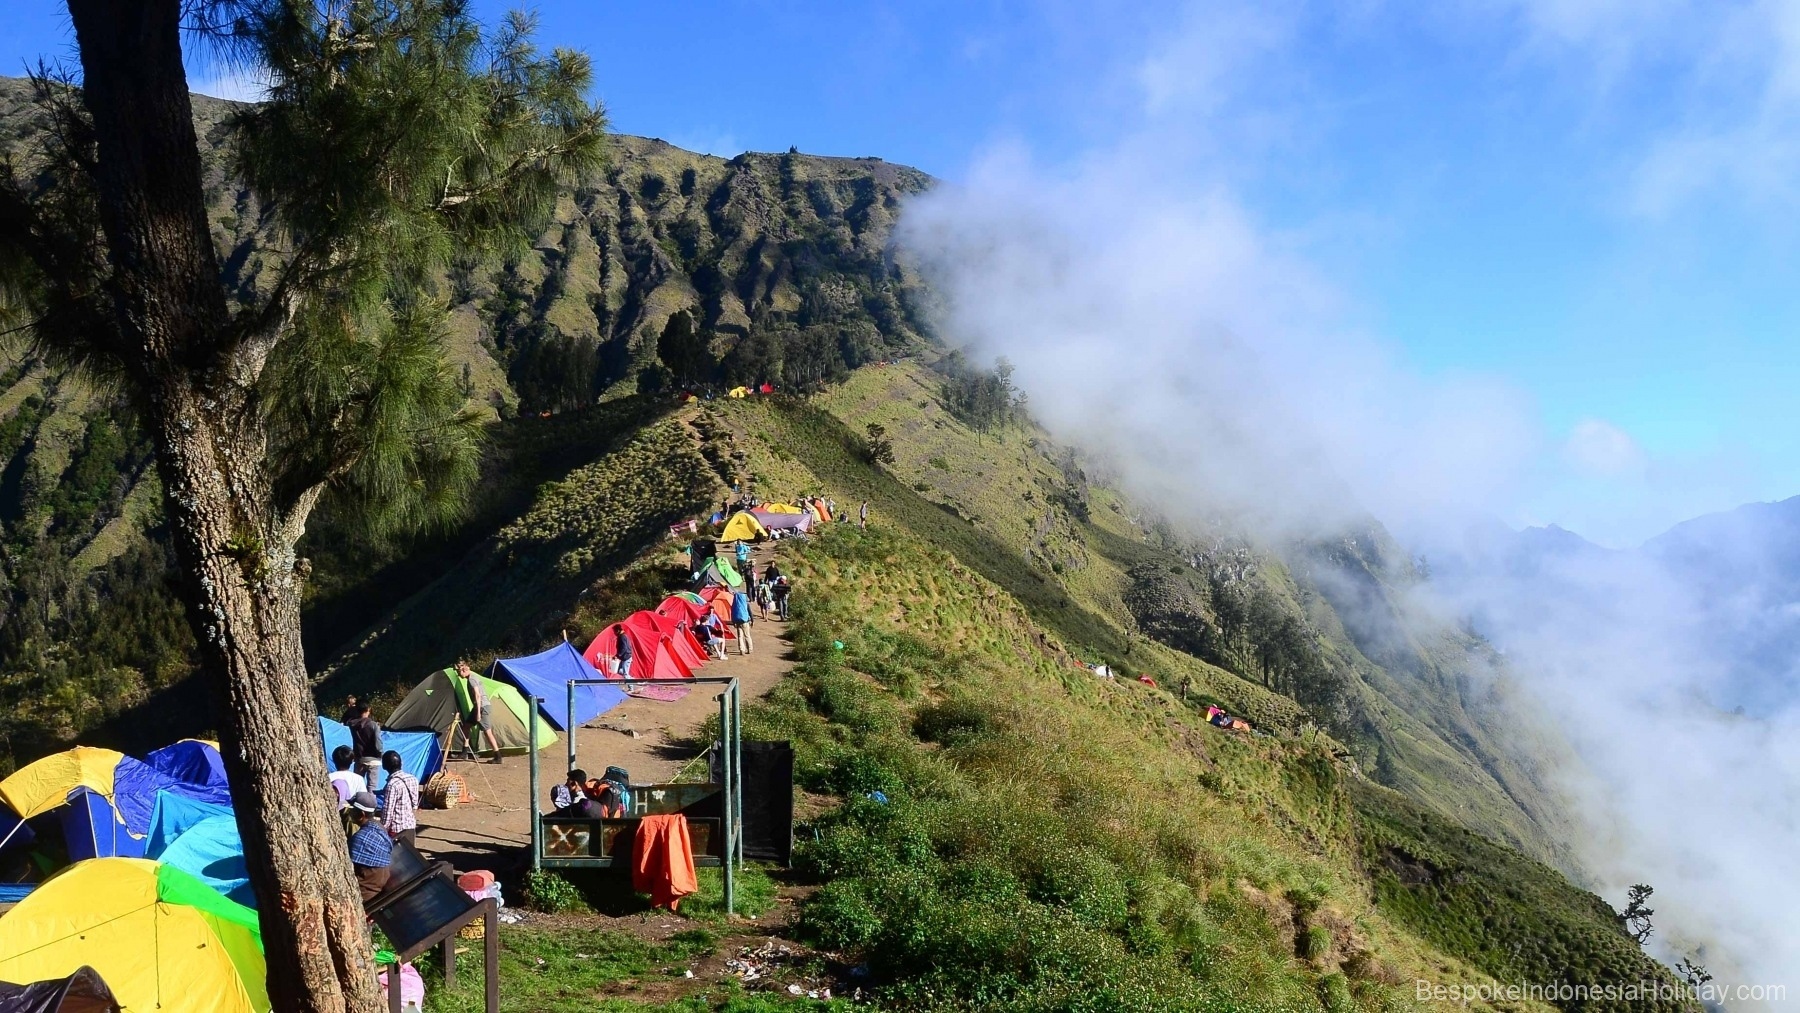 On the green crater rim of the volcano, there are numerous tents of different colors lined up and a few people. Lombok. Mount Rinjani Trekking Trip | Bespoke Indonesia Holiday.